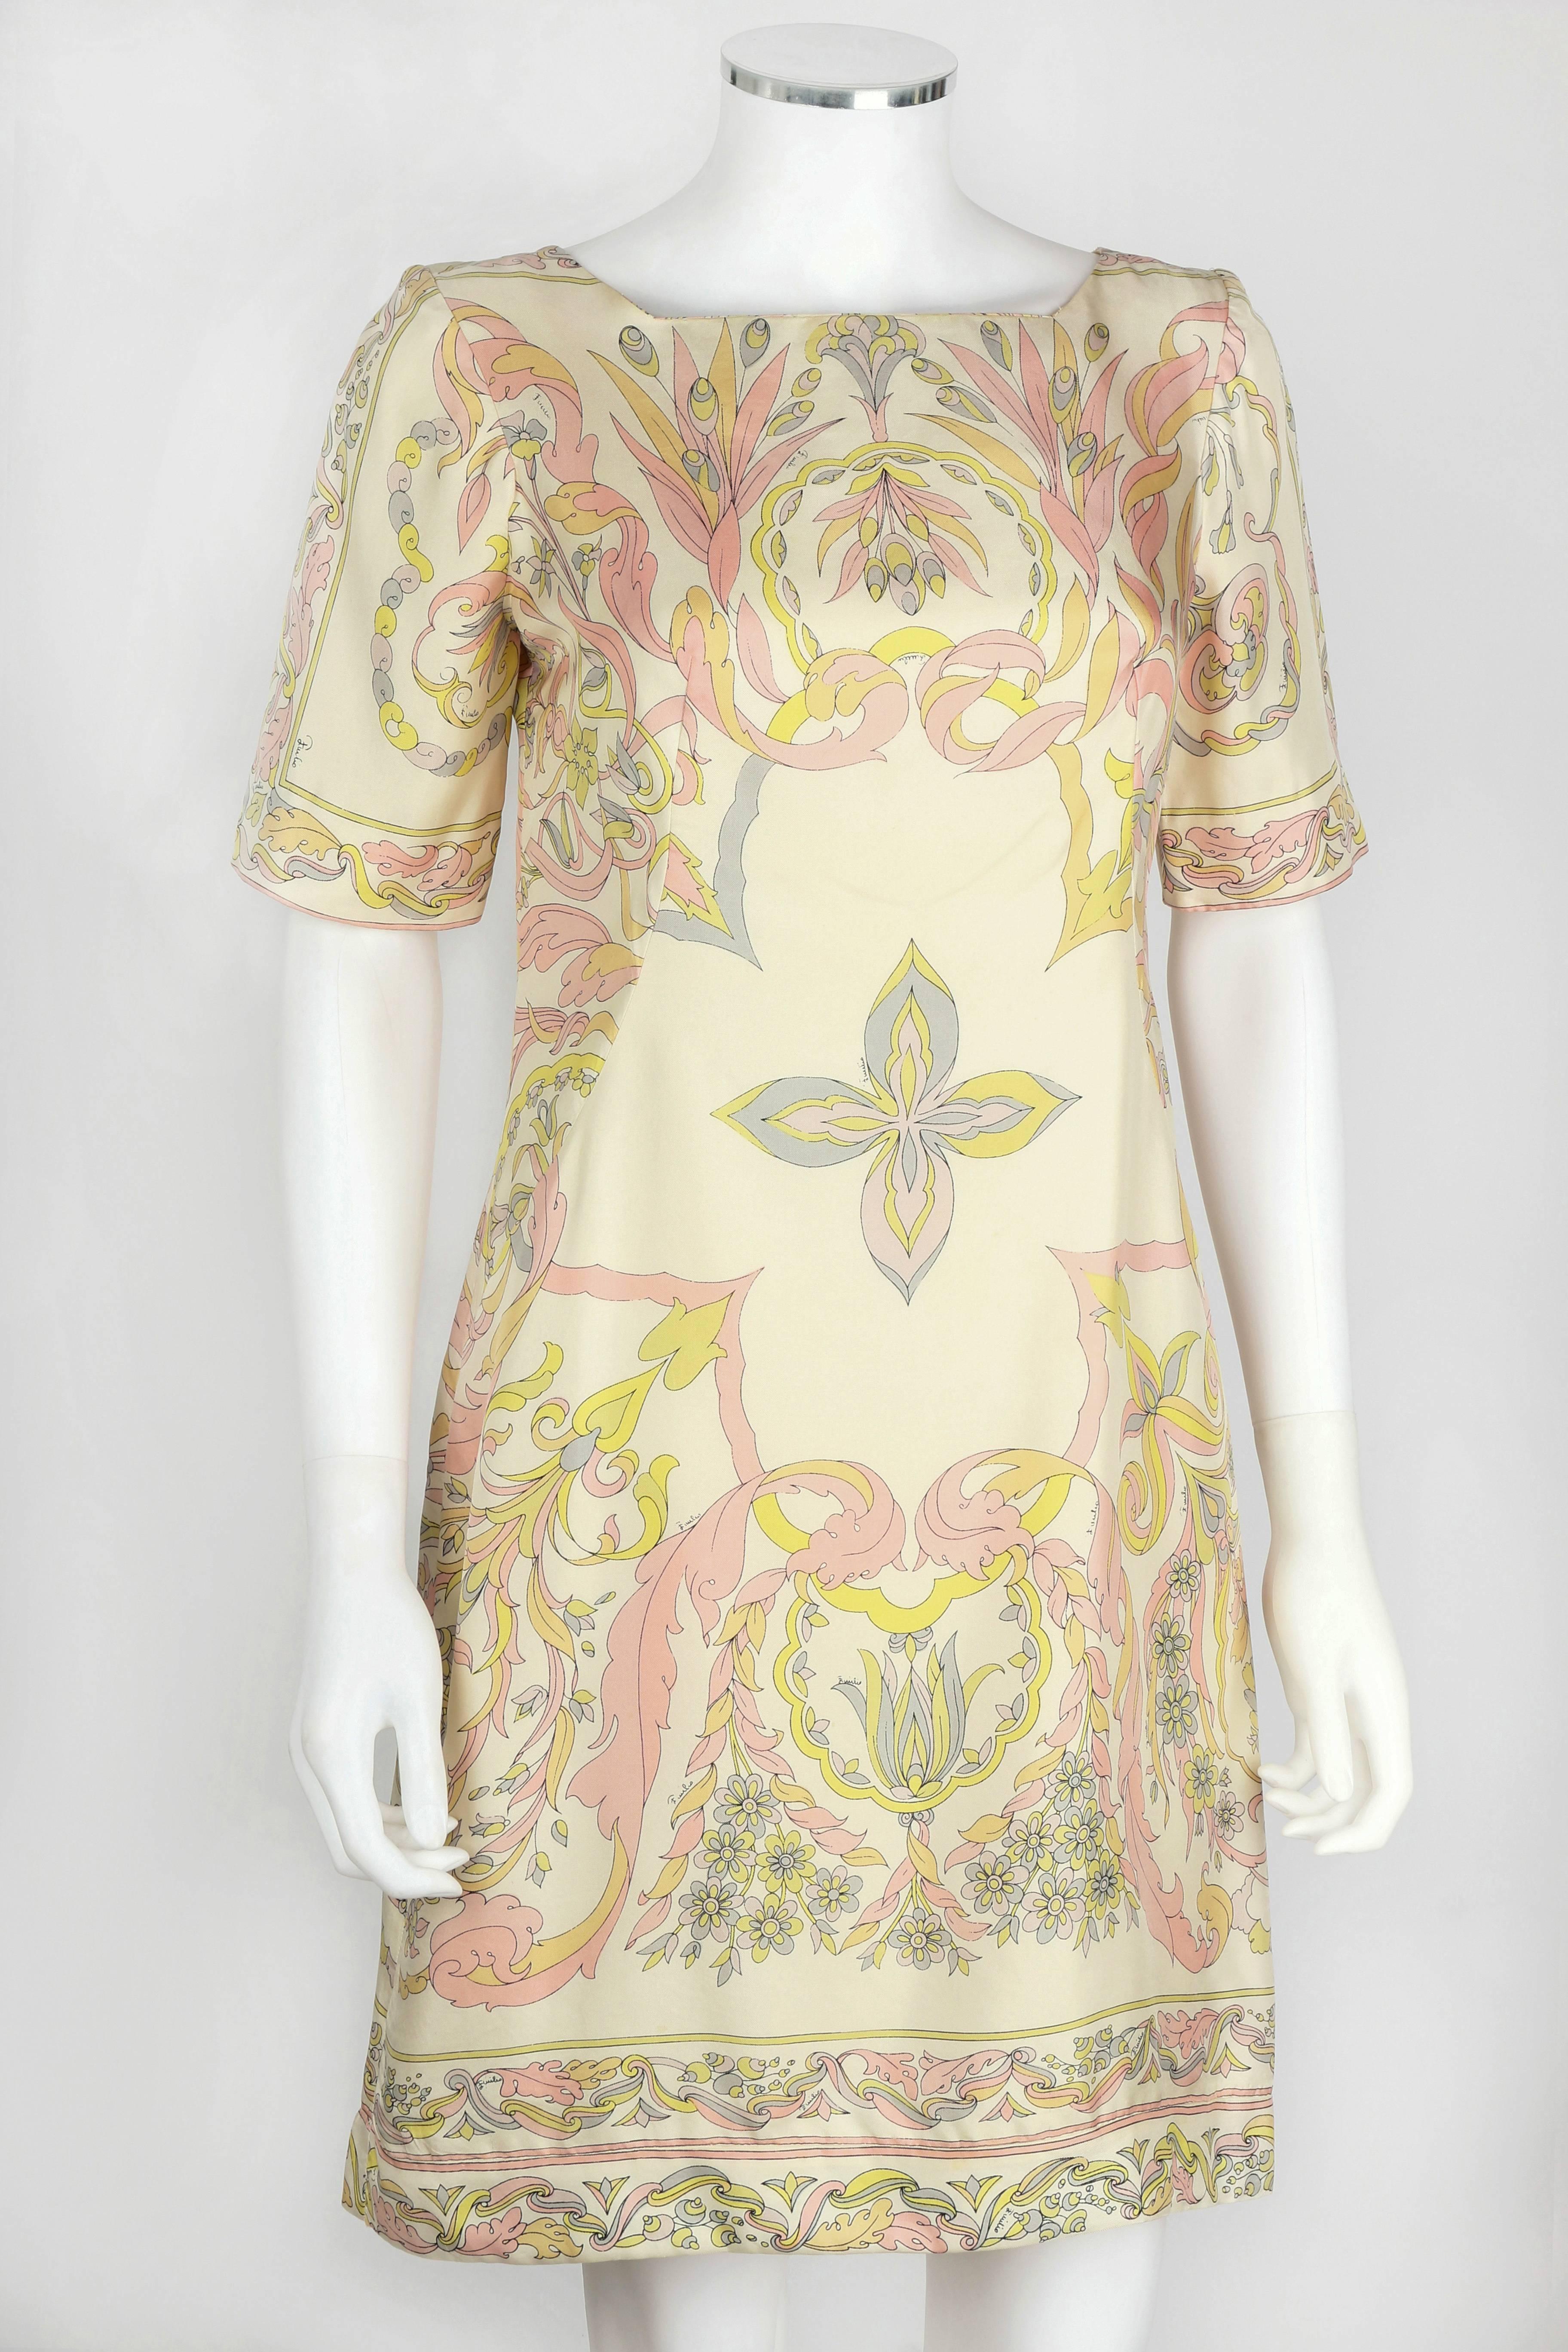 1960s Emilio Pucci Ivory silk shift dress with a pastel art noveau/baroque inspired floral scrollwork print. Short sleeves. Zips at side. Lined. Please note that this item was clipped to better fit our mannequin for photographs. Marked Fabric